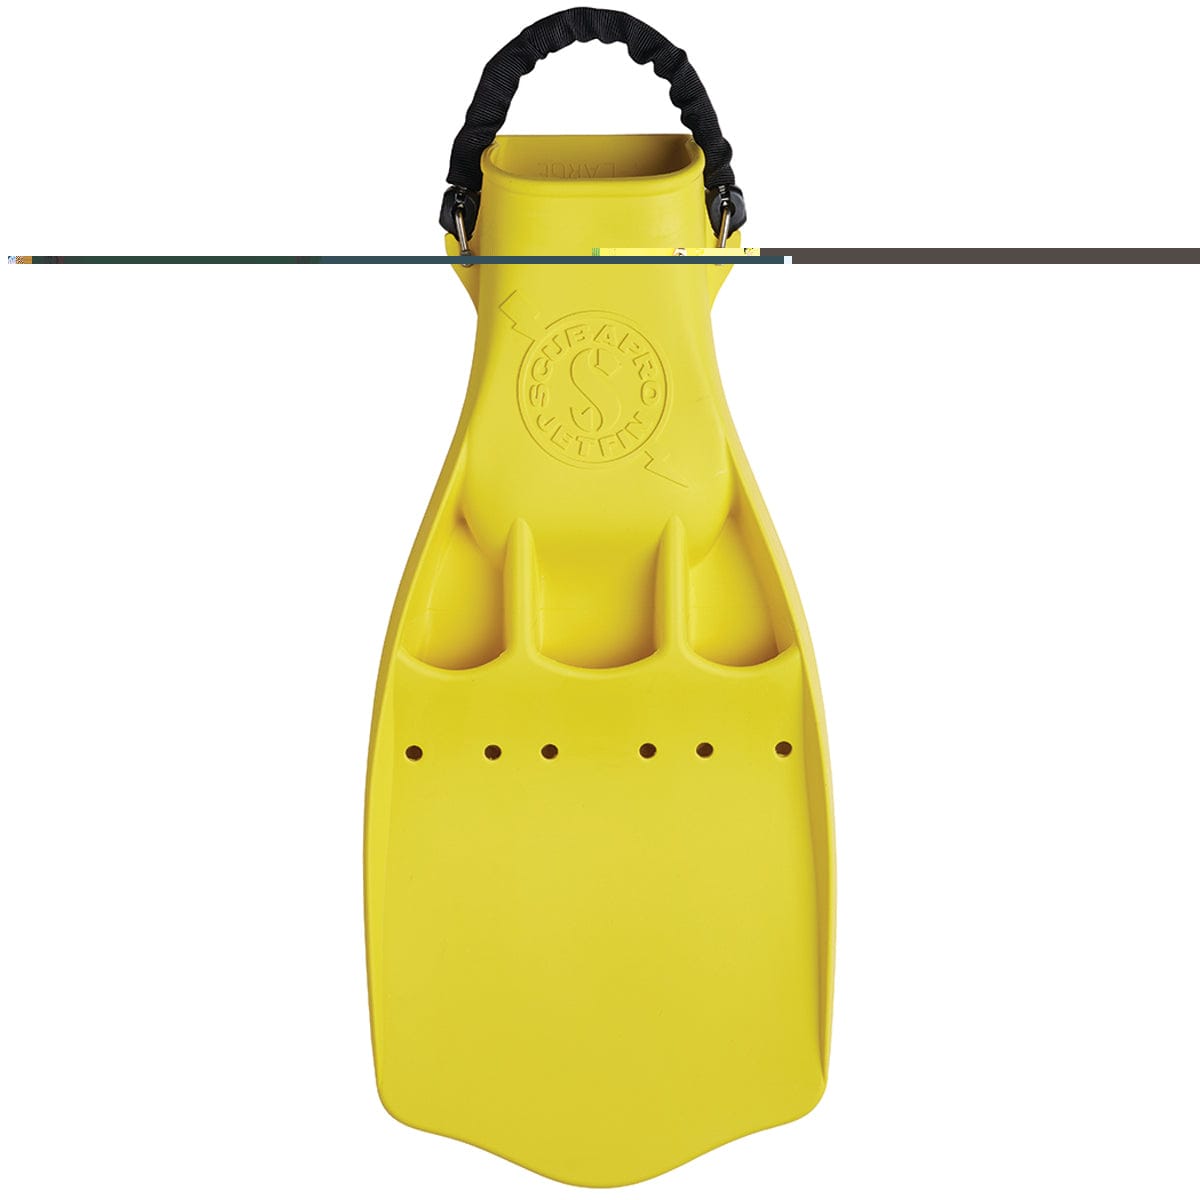 Scubapro Jet w/Spring Heel Strap Diving Fin - Yellow - 6